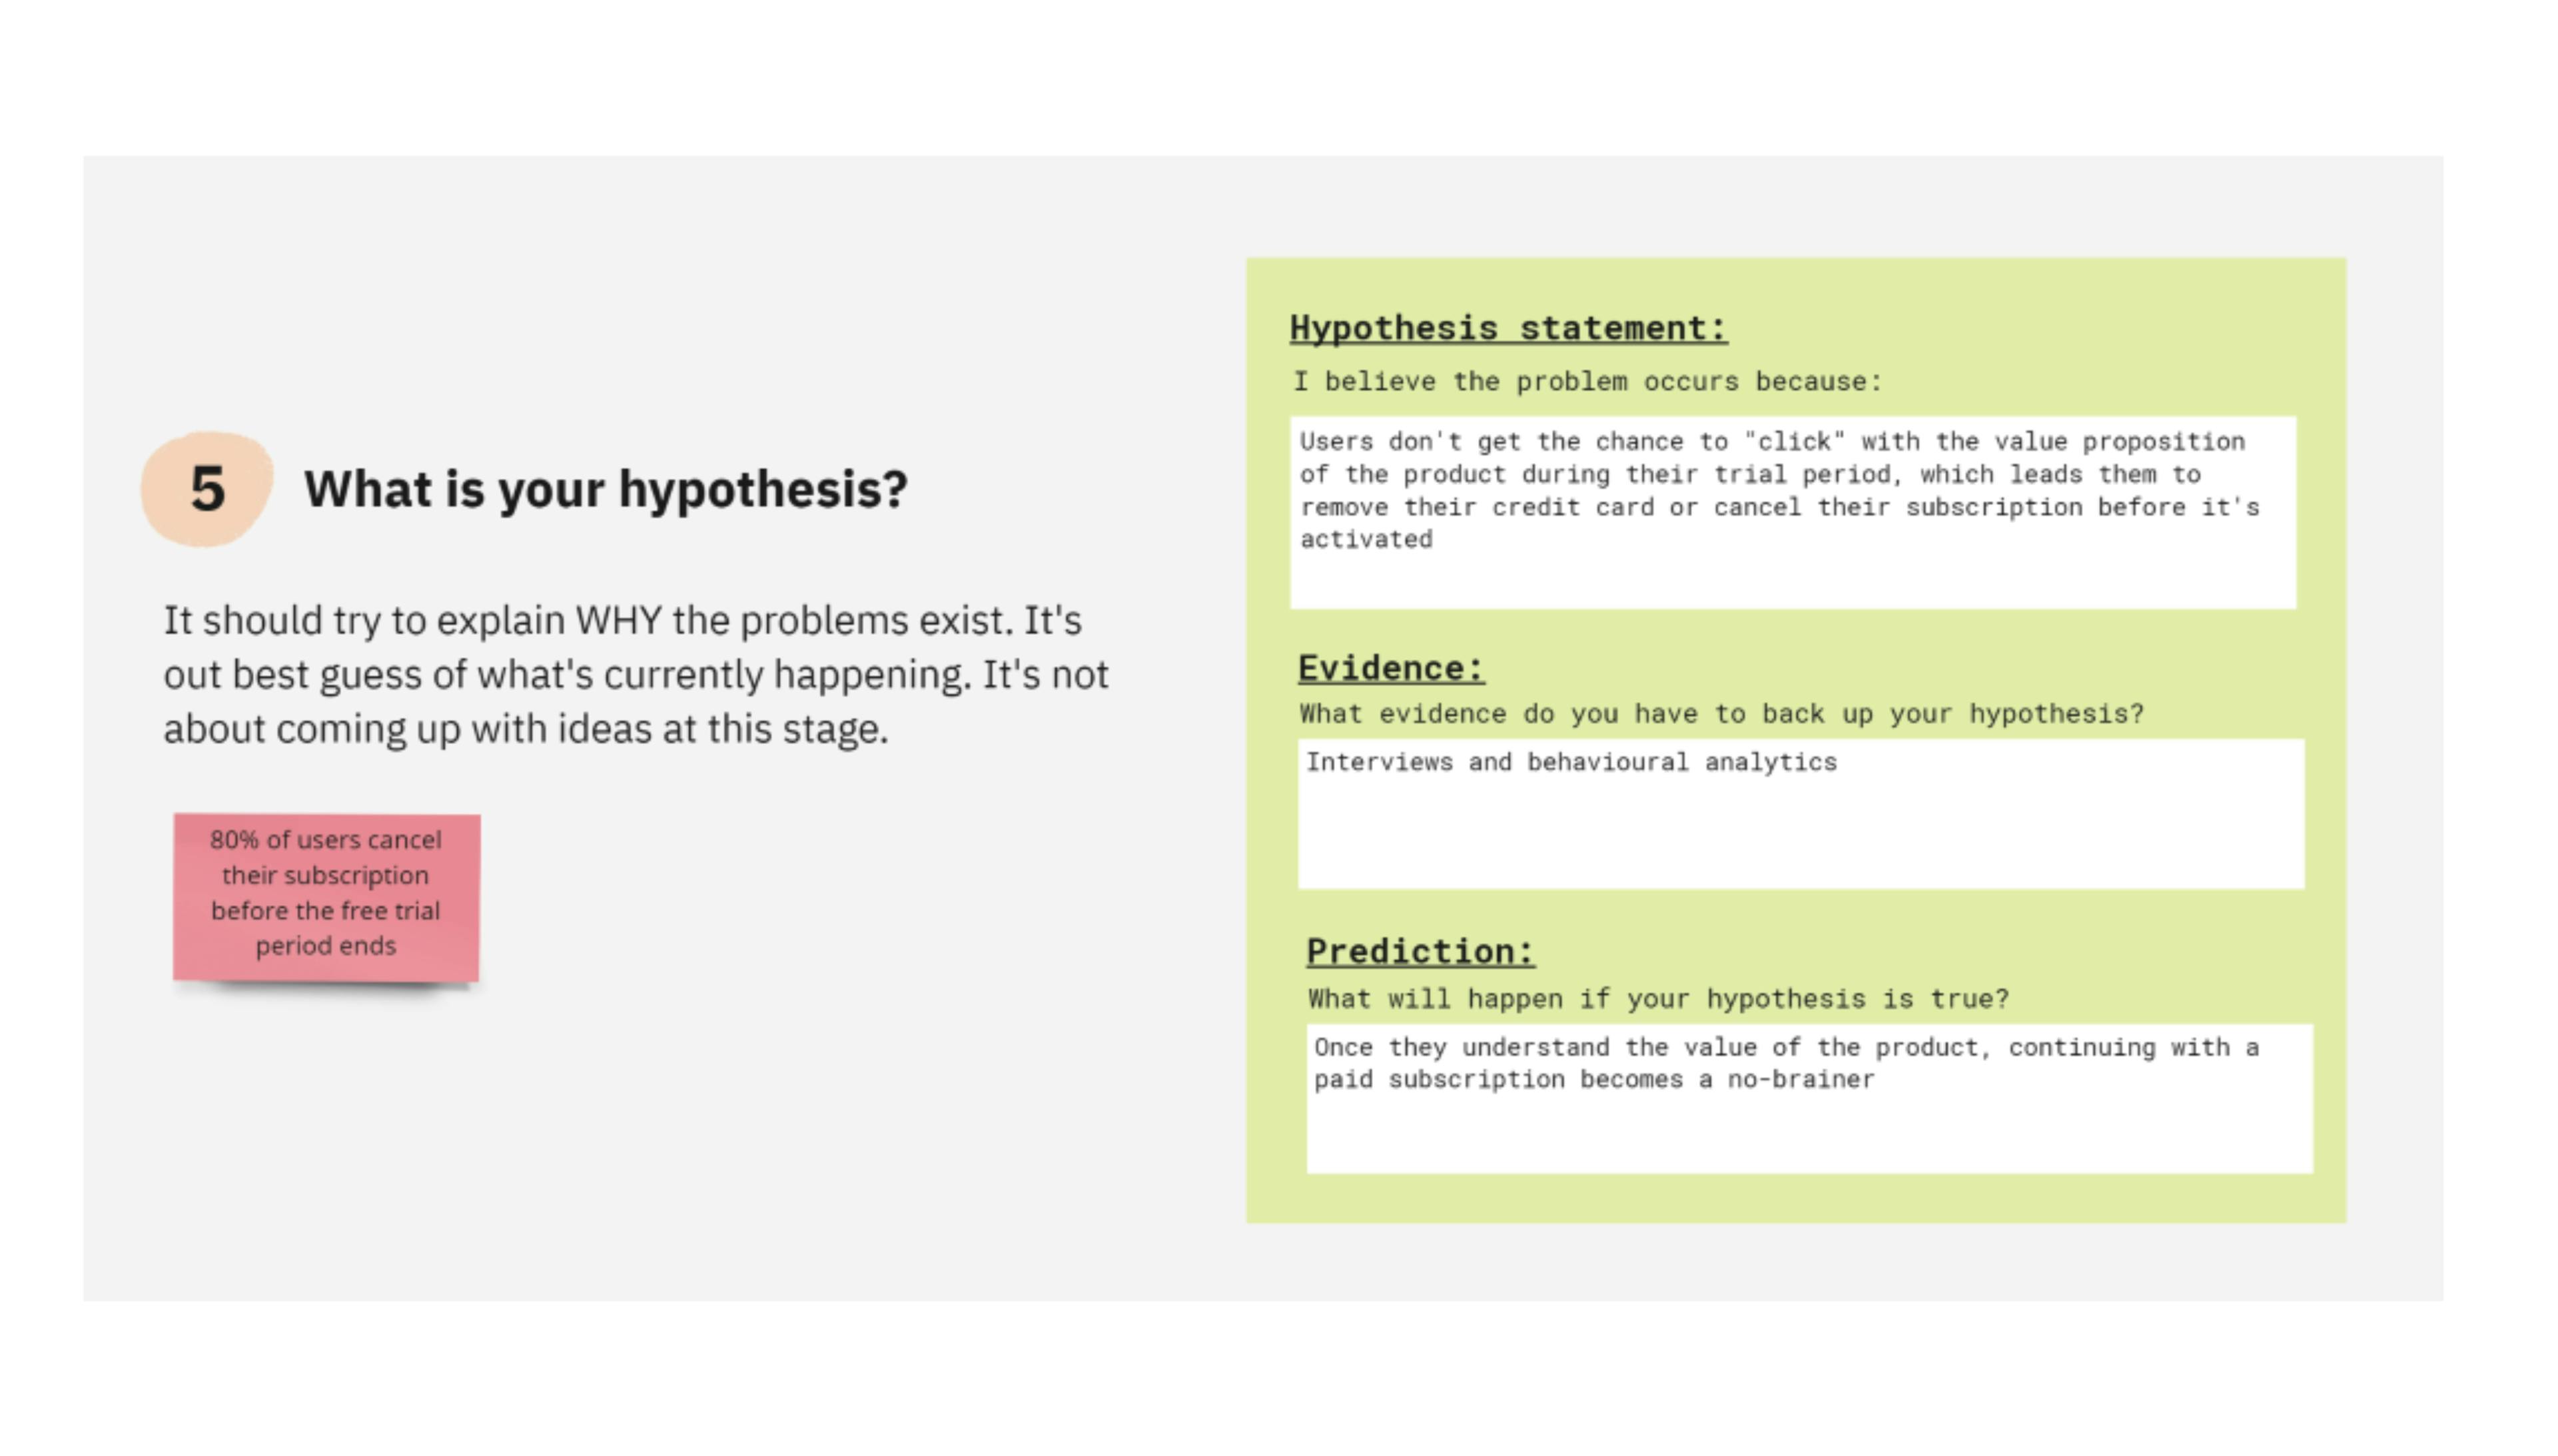 Write out your hypothesis (hopefully with fewer assumptions)